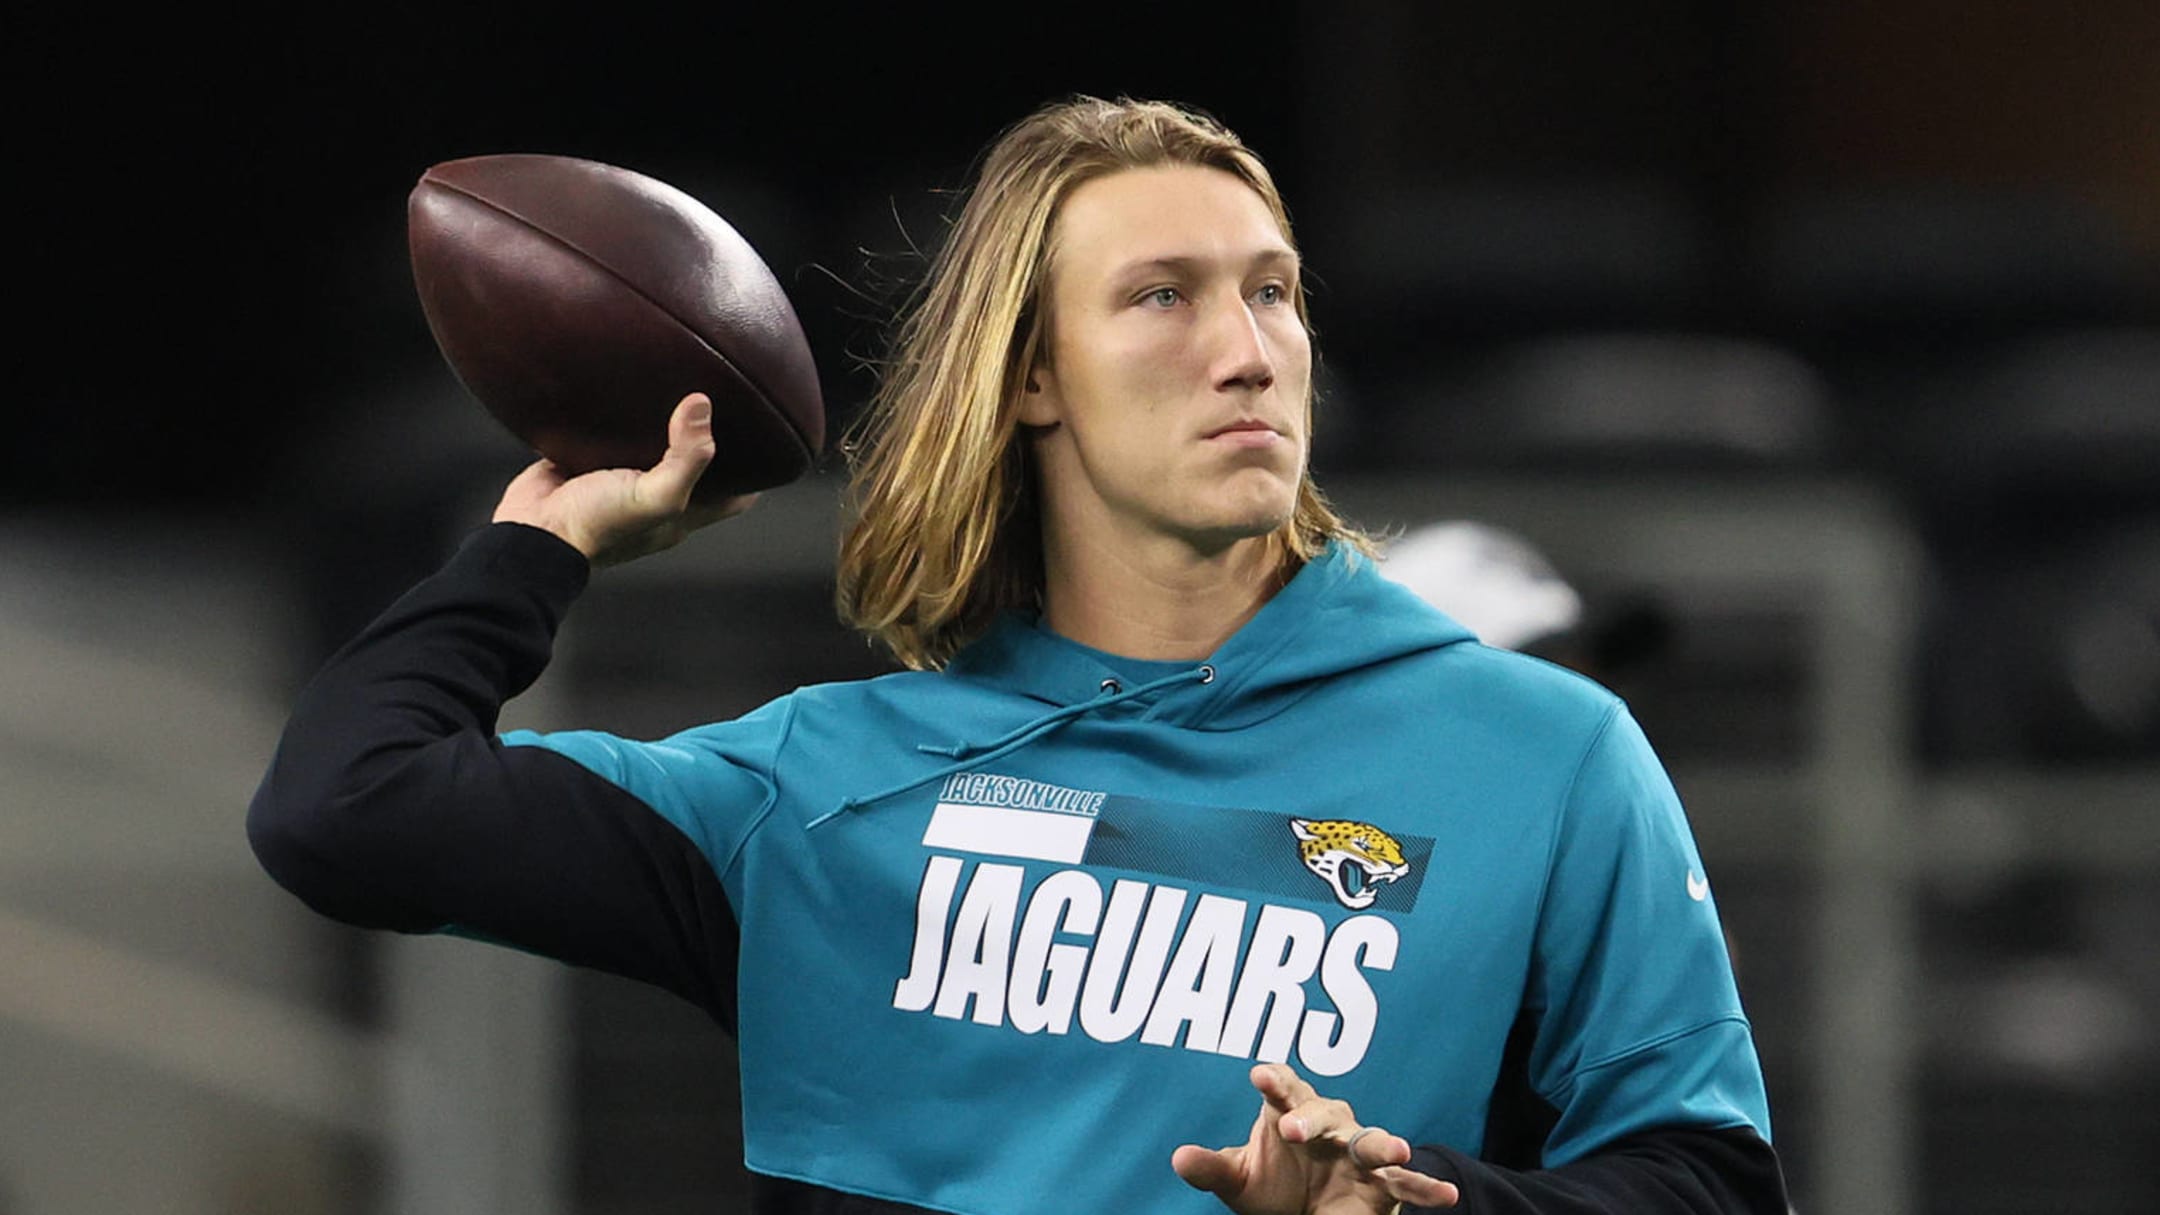 Trevor Lawrence shows up to practice in Georgia gear after Clemson